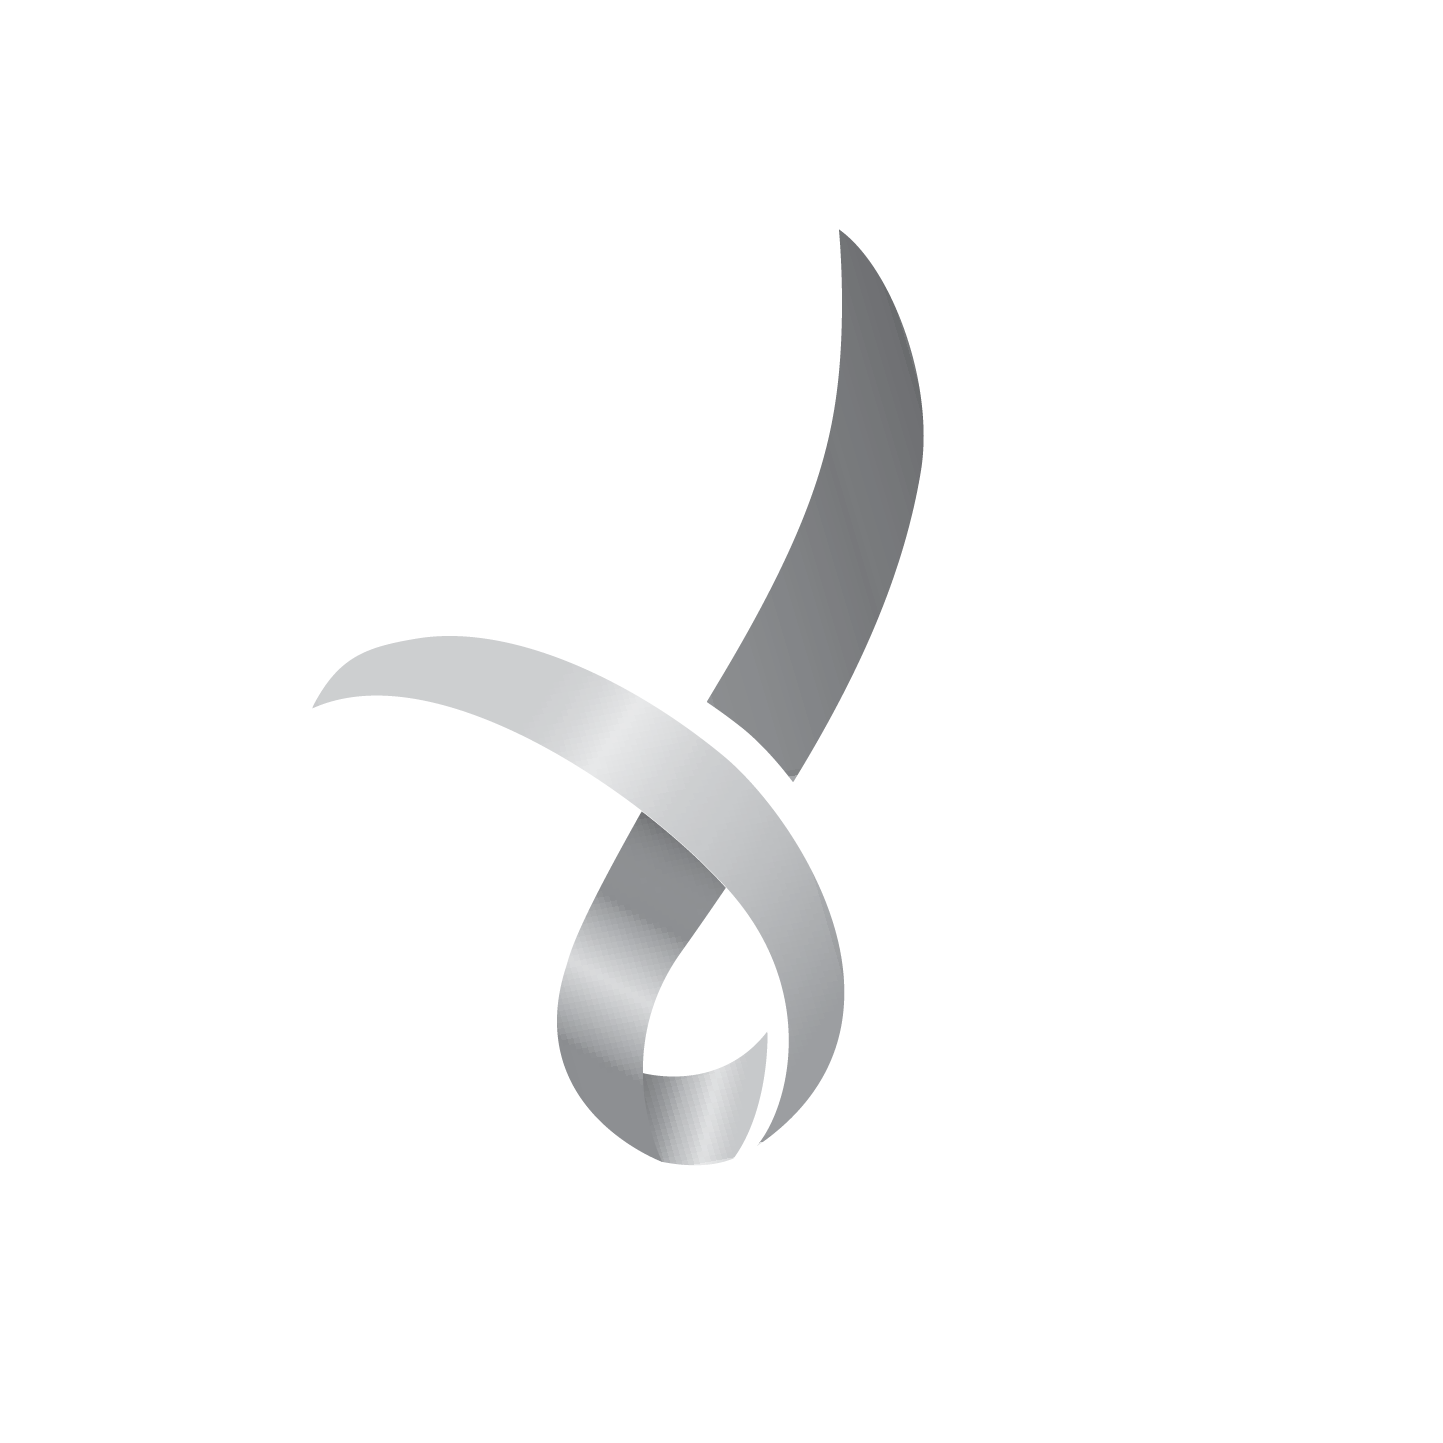 Registered Charity - Charitable Organization (1443x1443), Png Download